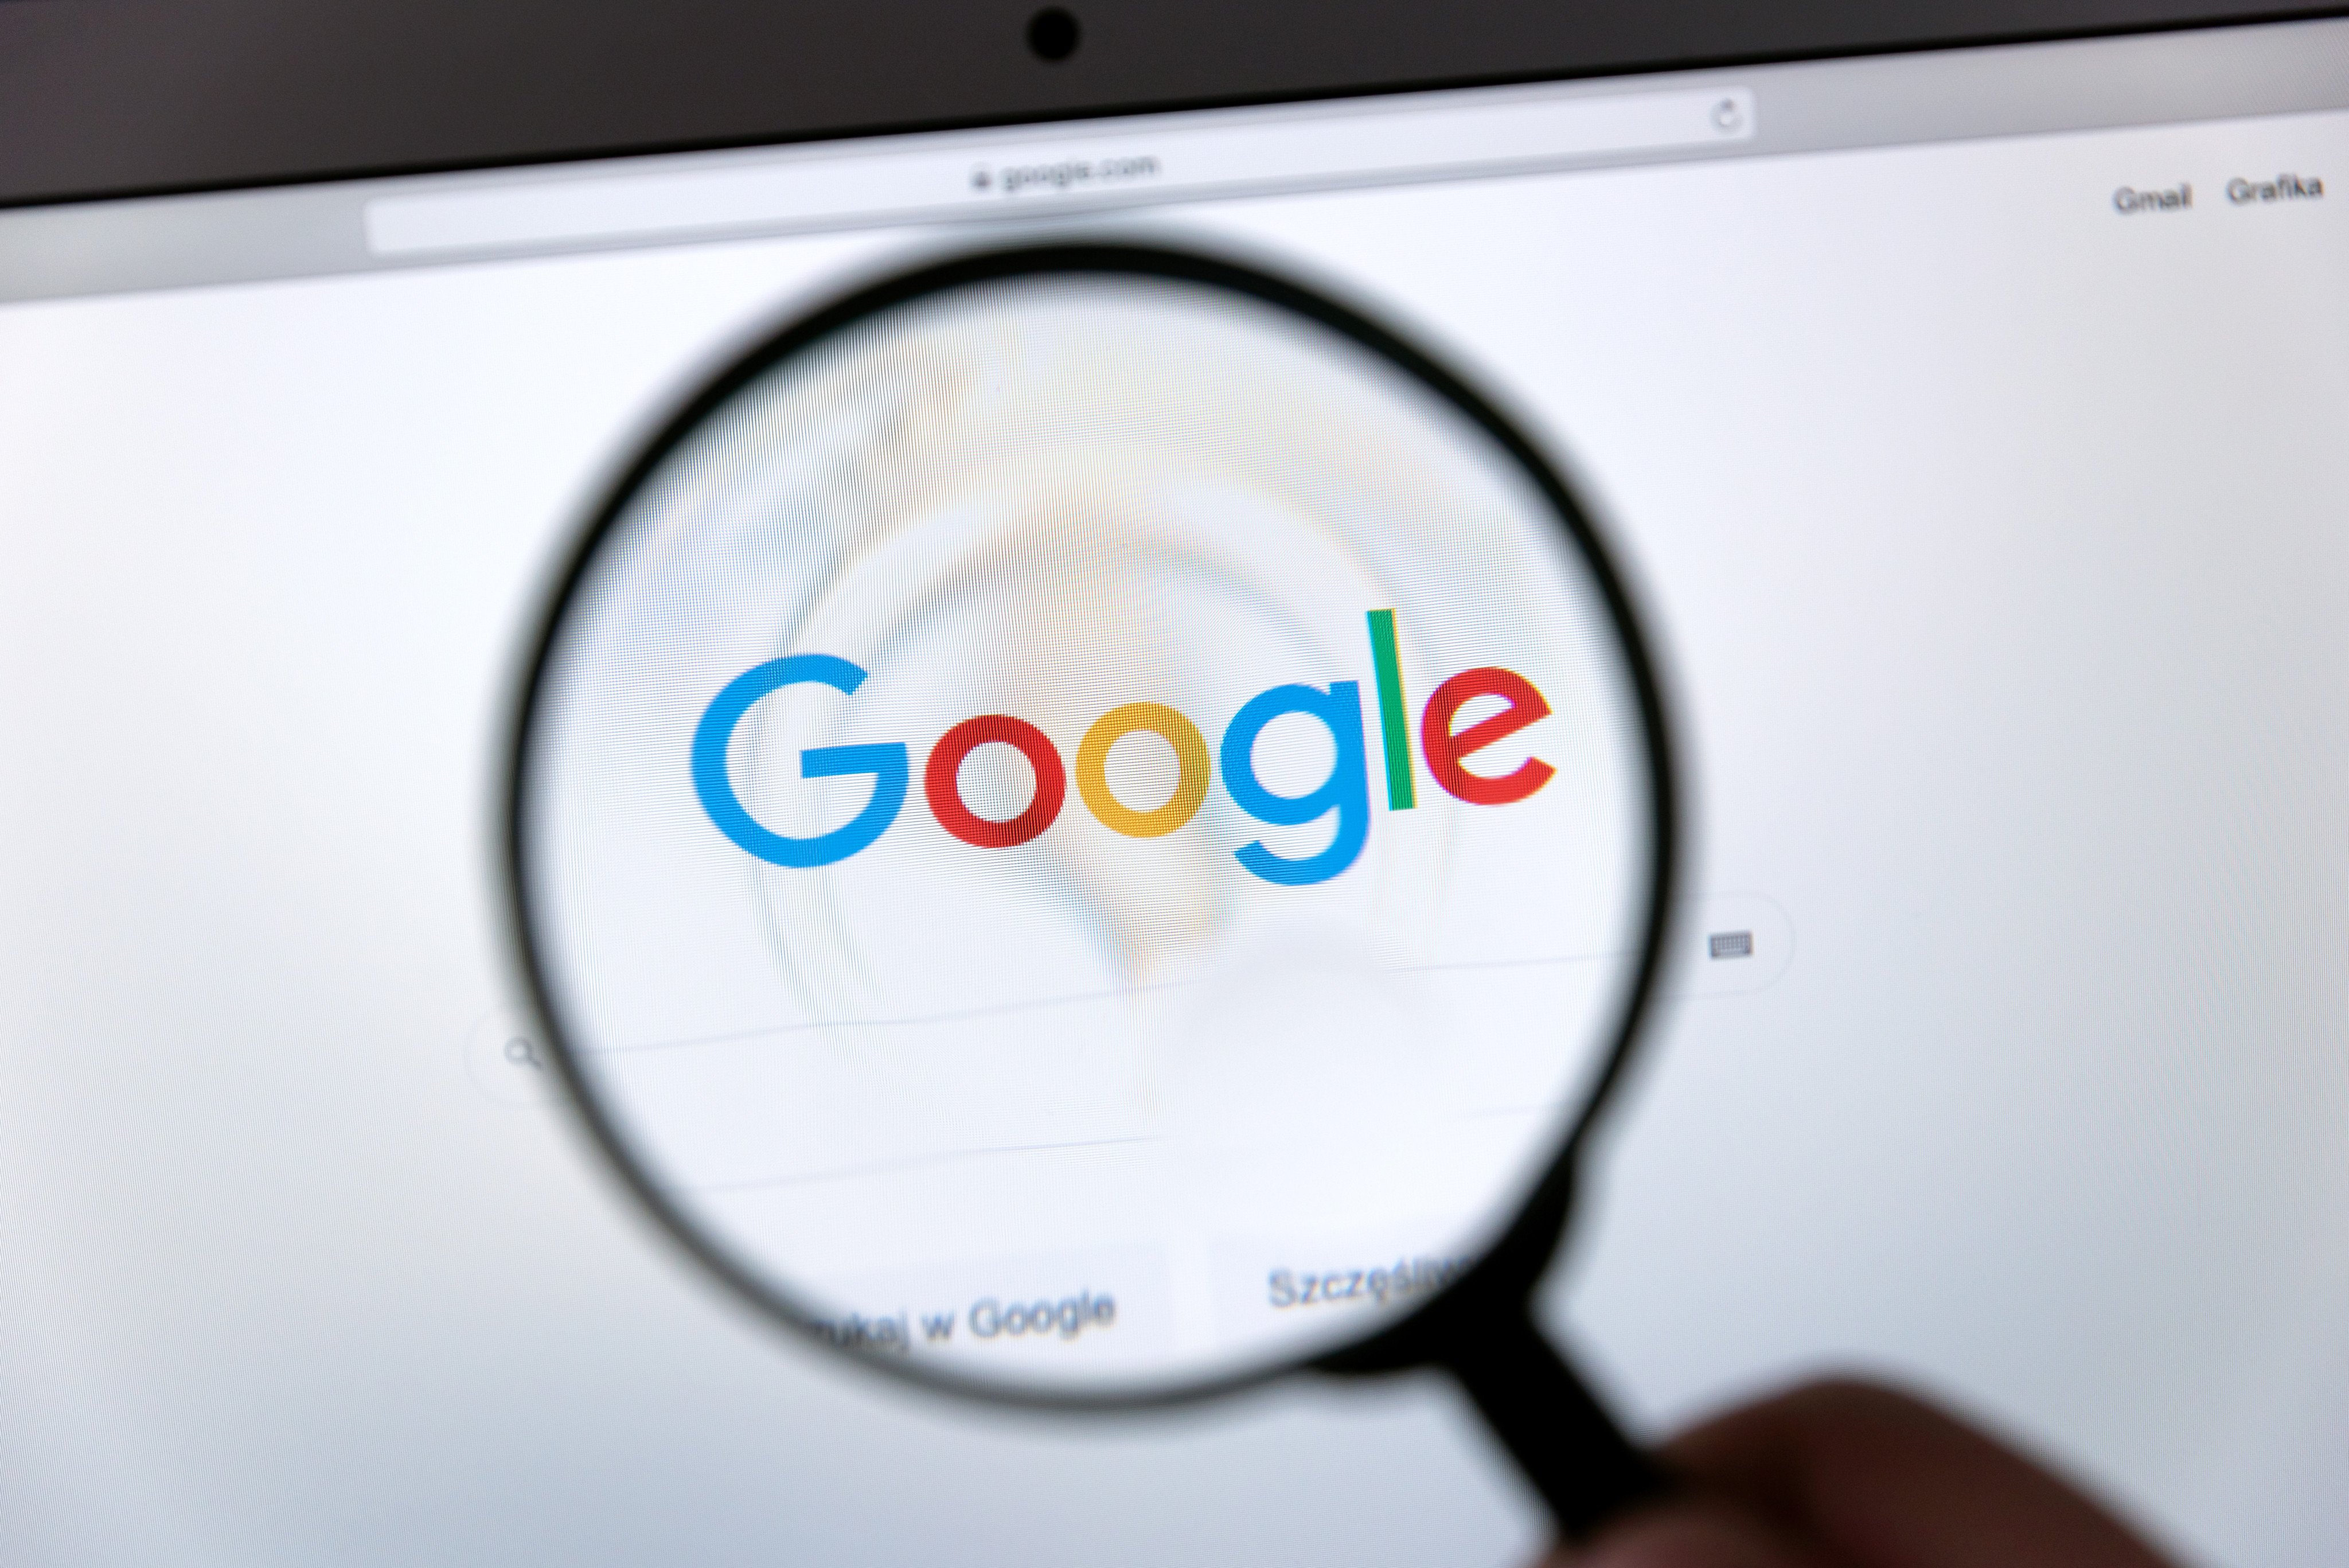 Google’s latest update sent search engine optimisation experts into a tailspin, desperately trying to unpack why some sites were boosted and others getting downranked. Photo: Shutterstock